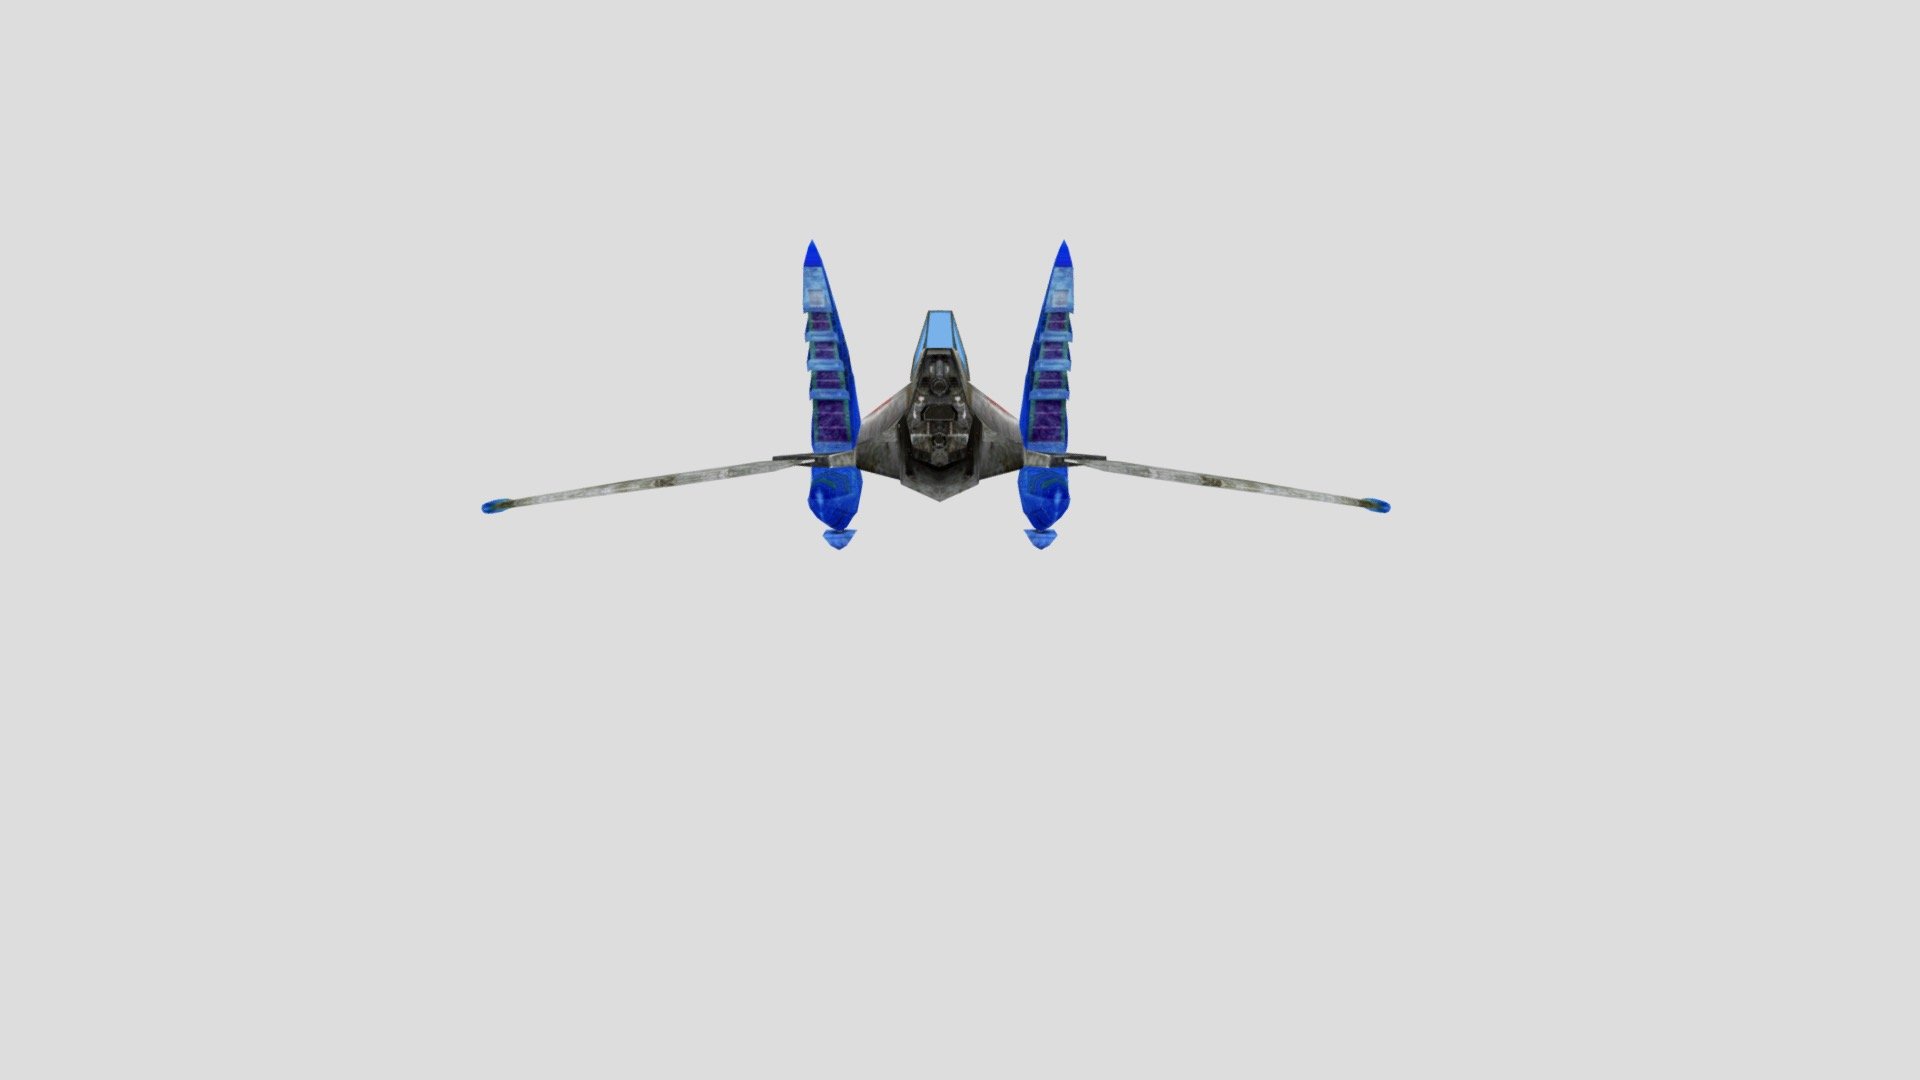 gamecube-star-fox-adventures-arwing-1-download-free-3d-model-by-spencer-psi0918-b96ada9